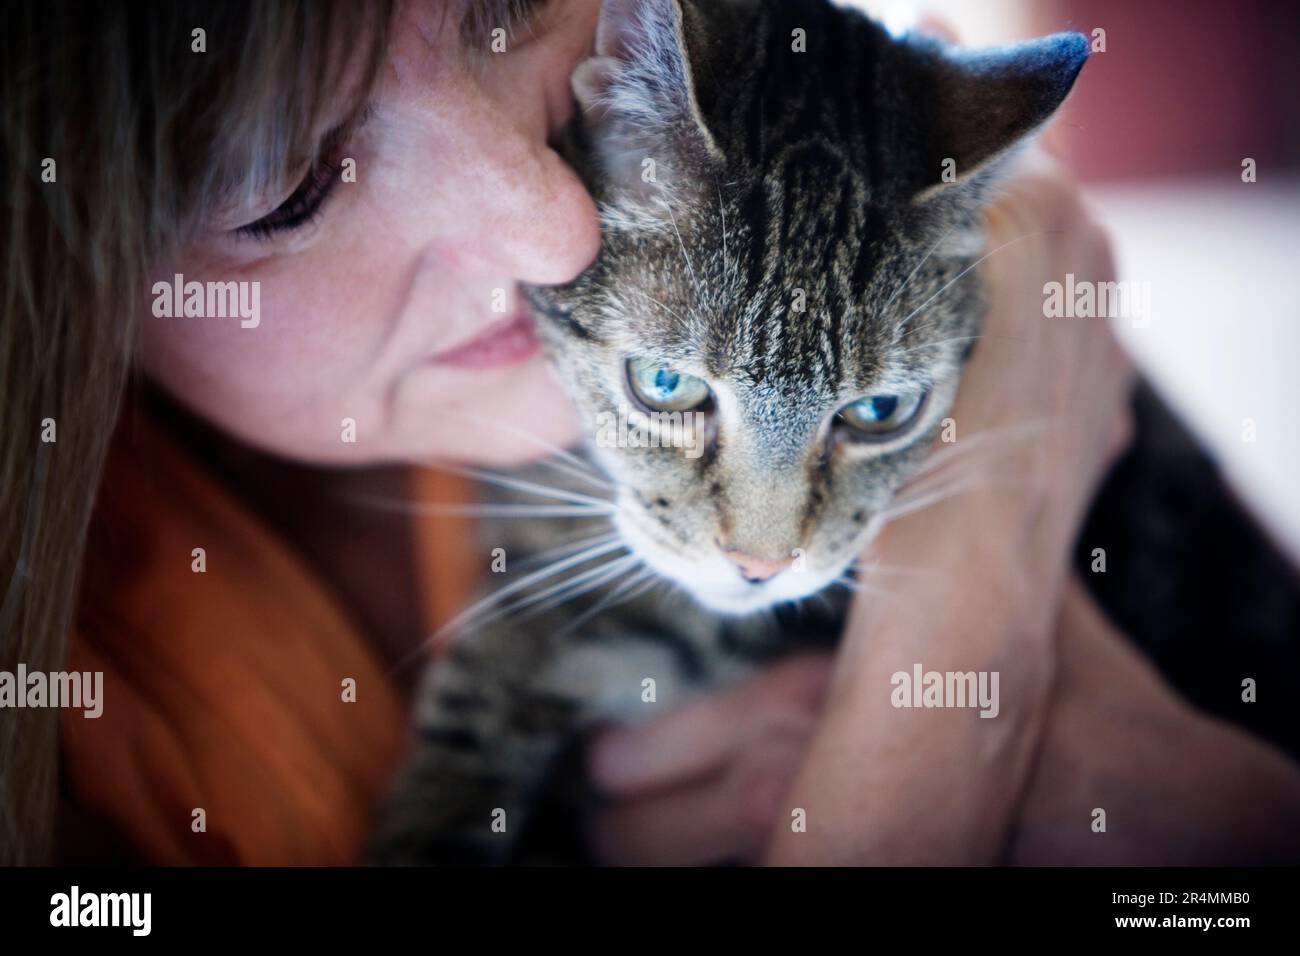 A woman lovingly holding her cat. Stock Photo